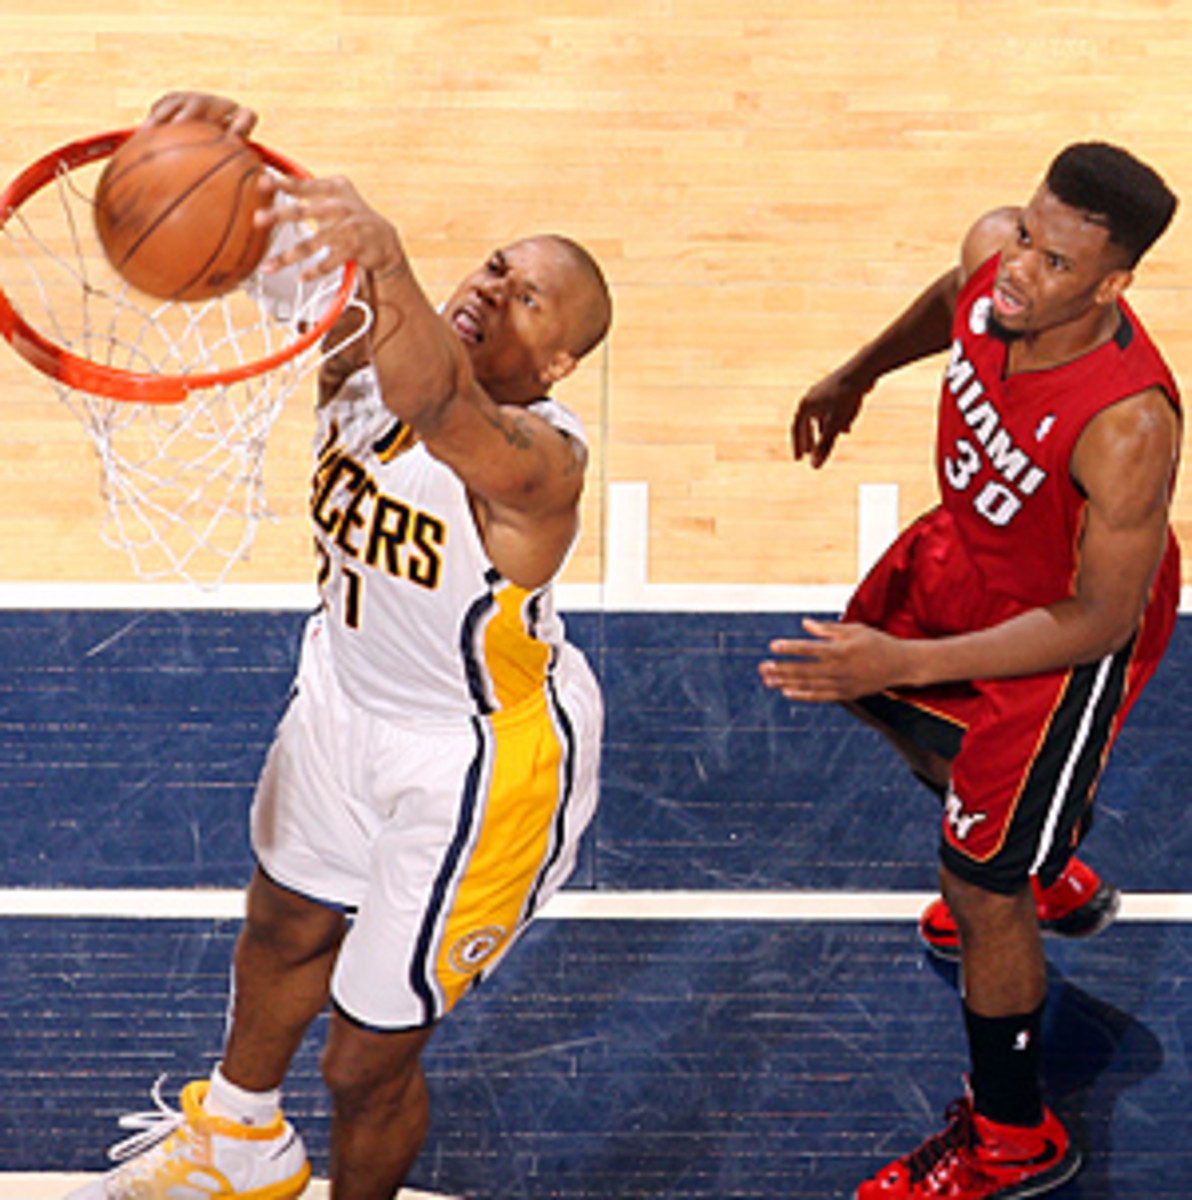 The return of David West (left), along with other offseason moves, has the Pacers poised to challenge the Heat again.